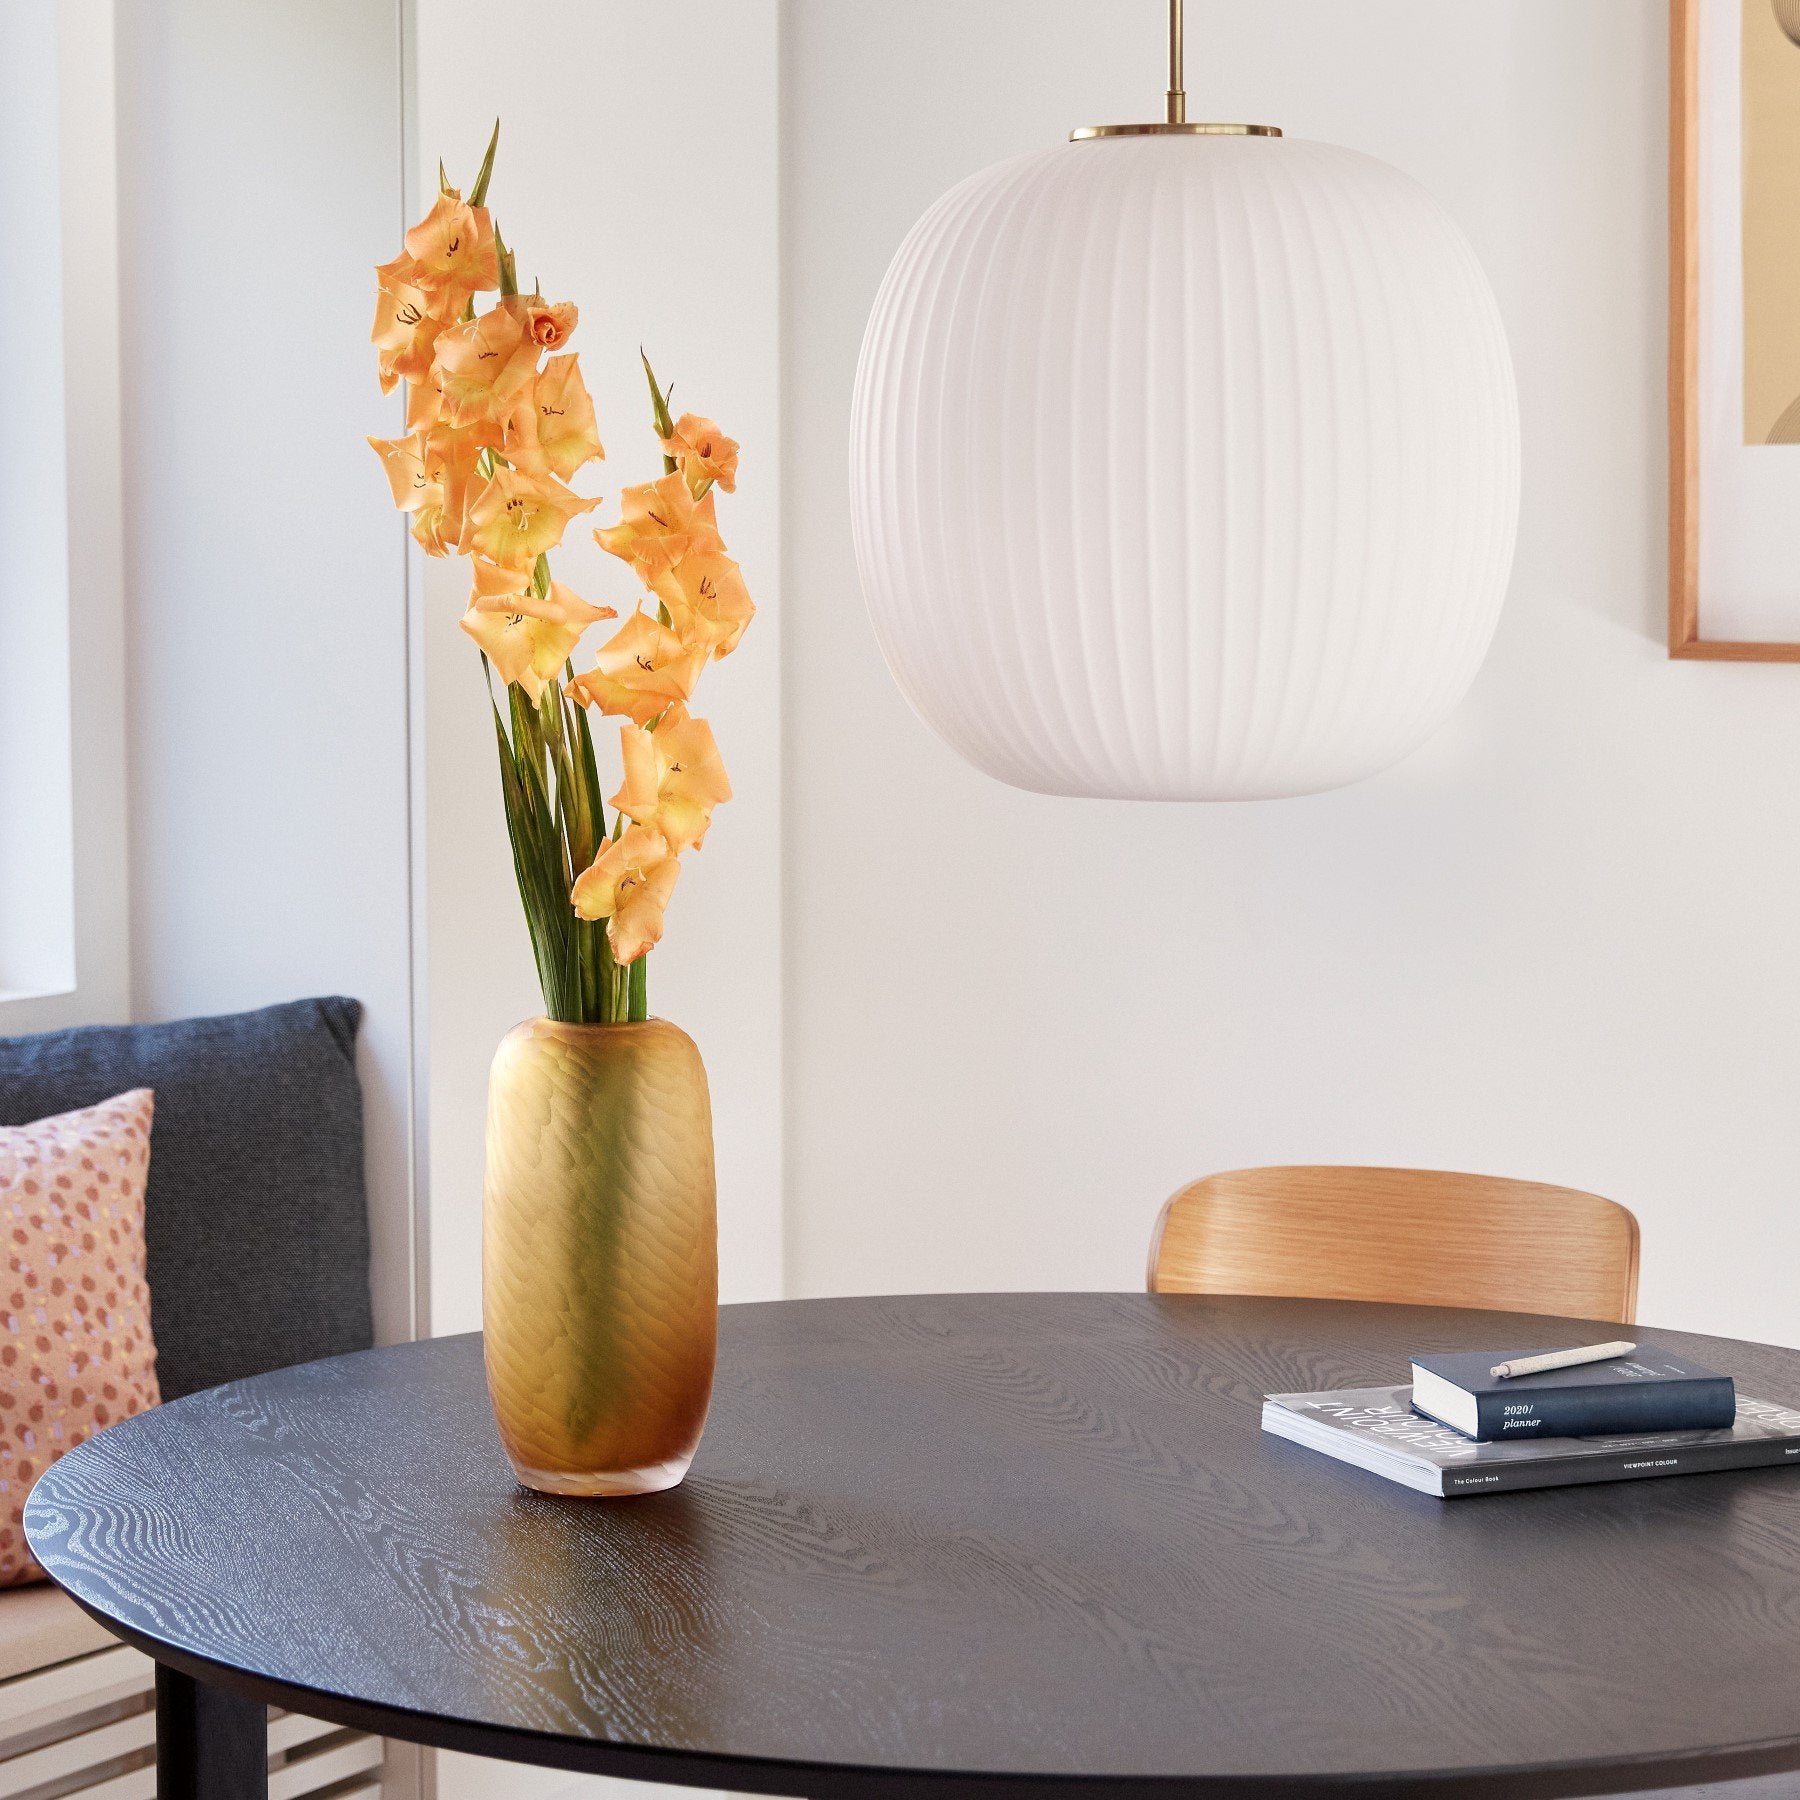 Hubsch Interior Scandi style tall dune textured vase in amber gold glass on a black wood dining table with flower arrangement